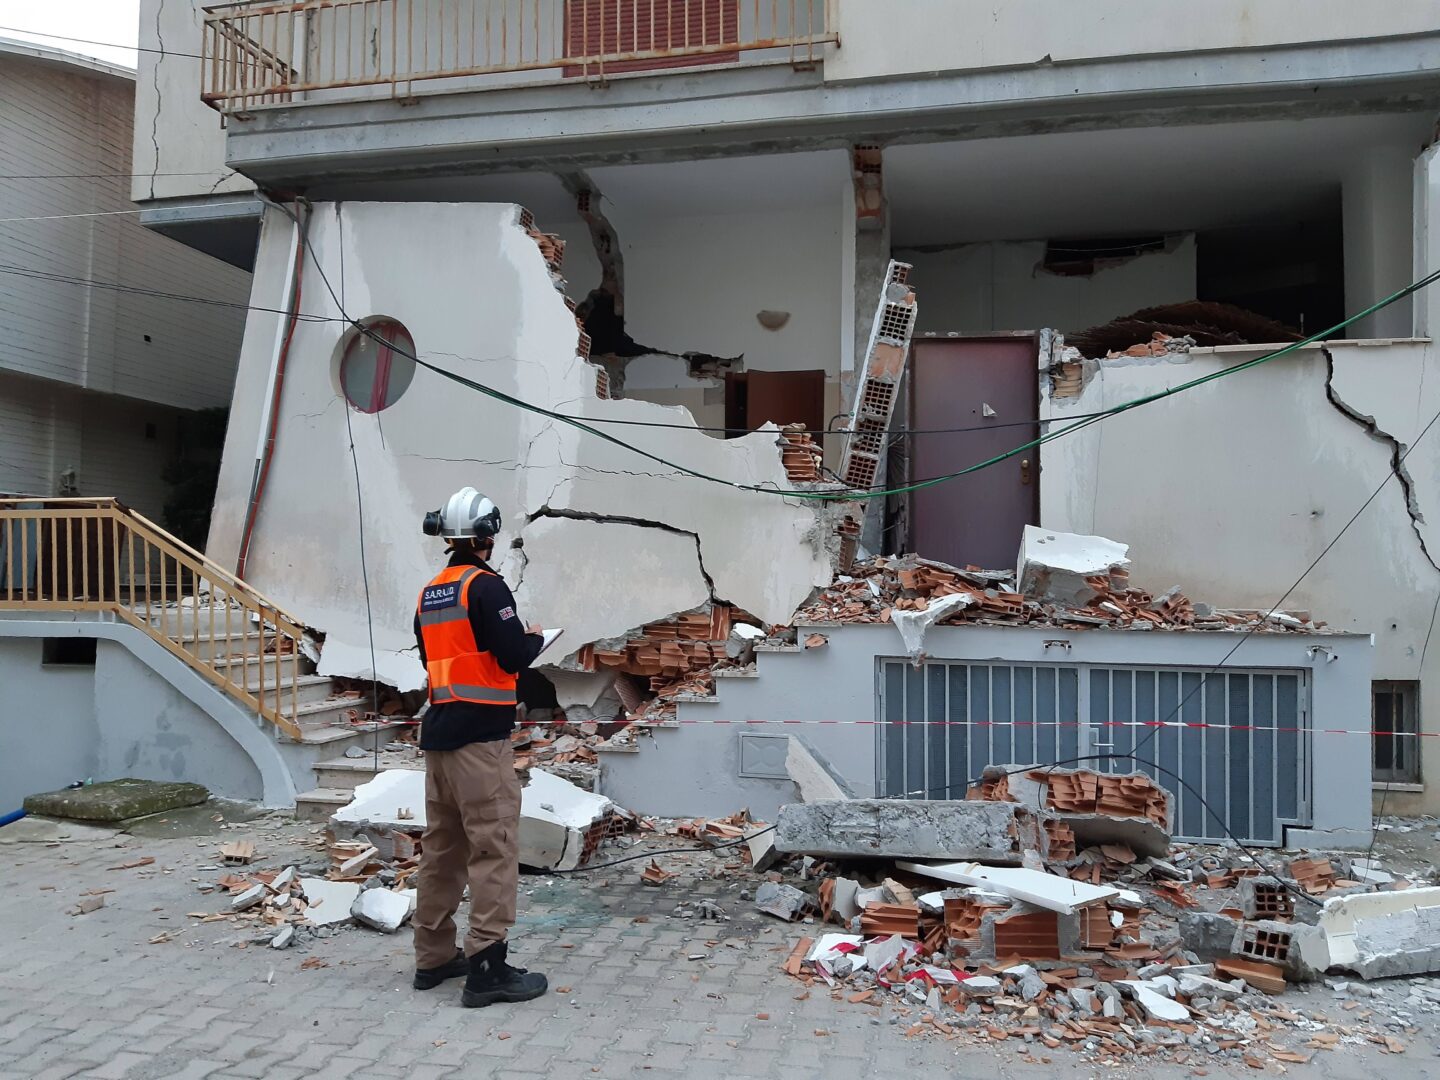 Disaster relief in an urban setting: The aftermath of Albania's largest earthquake in 30 years